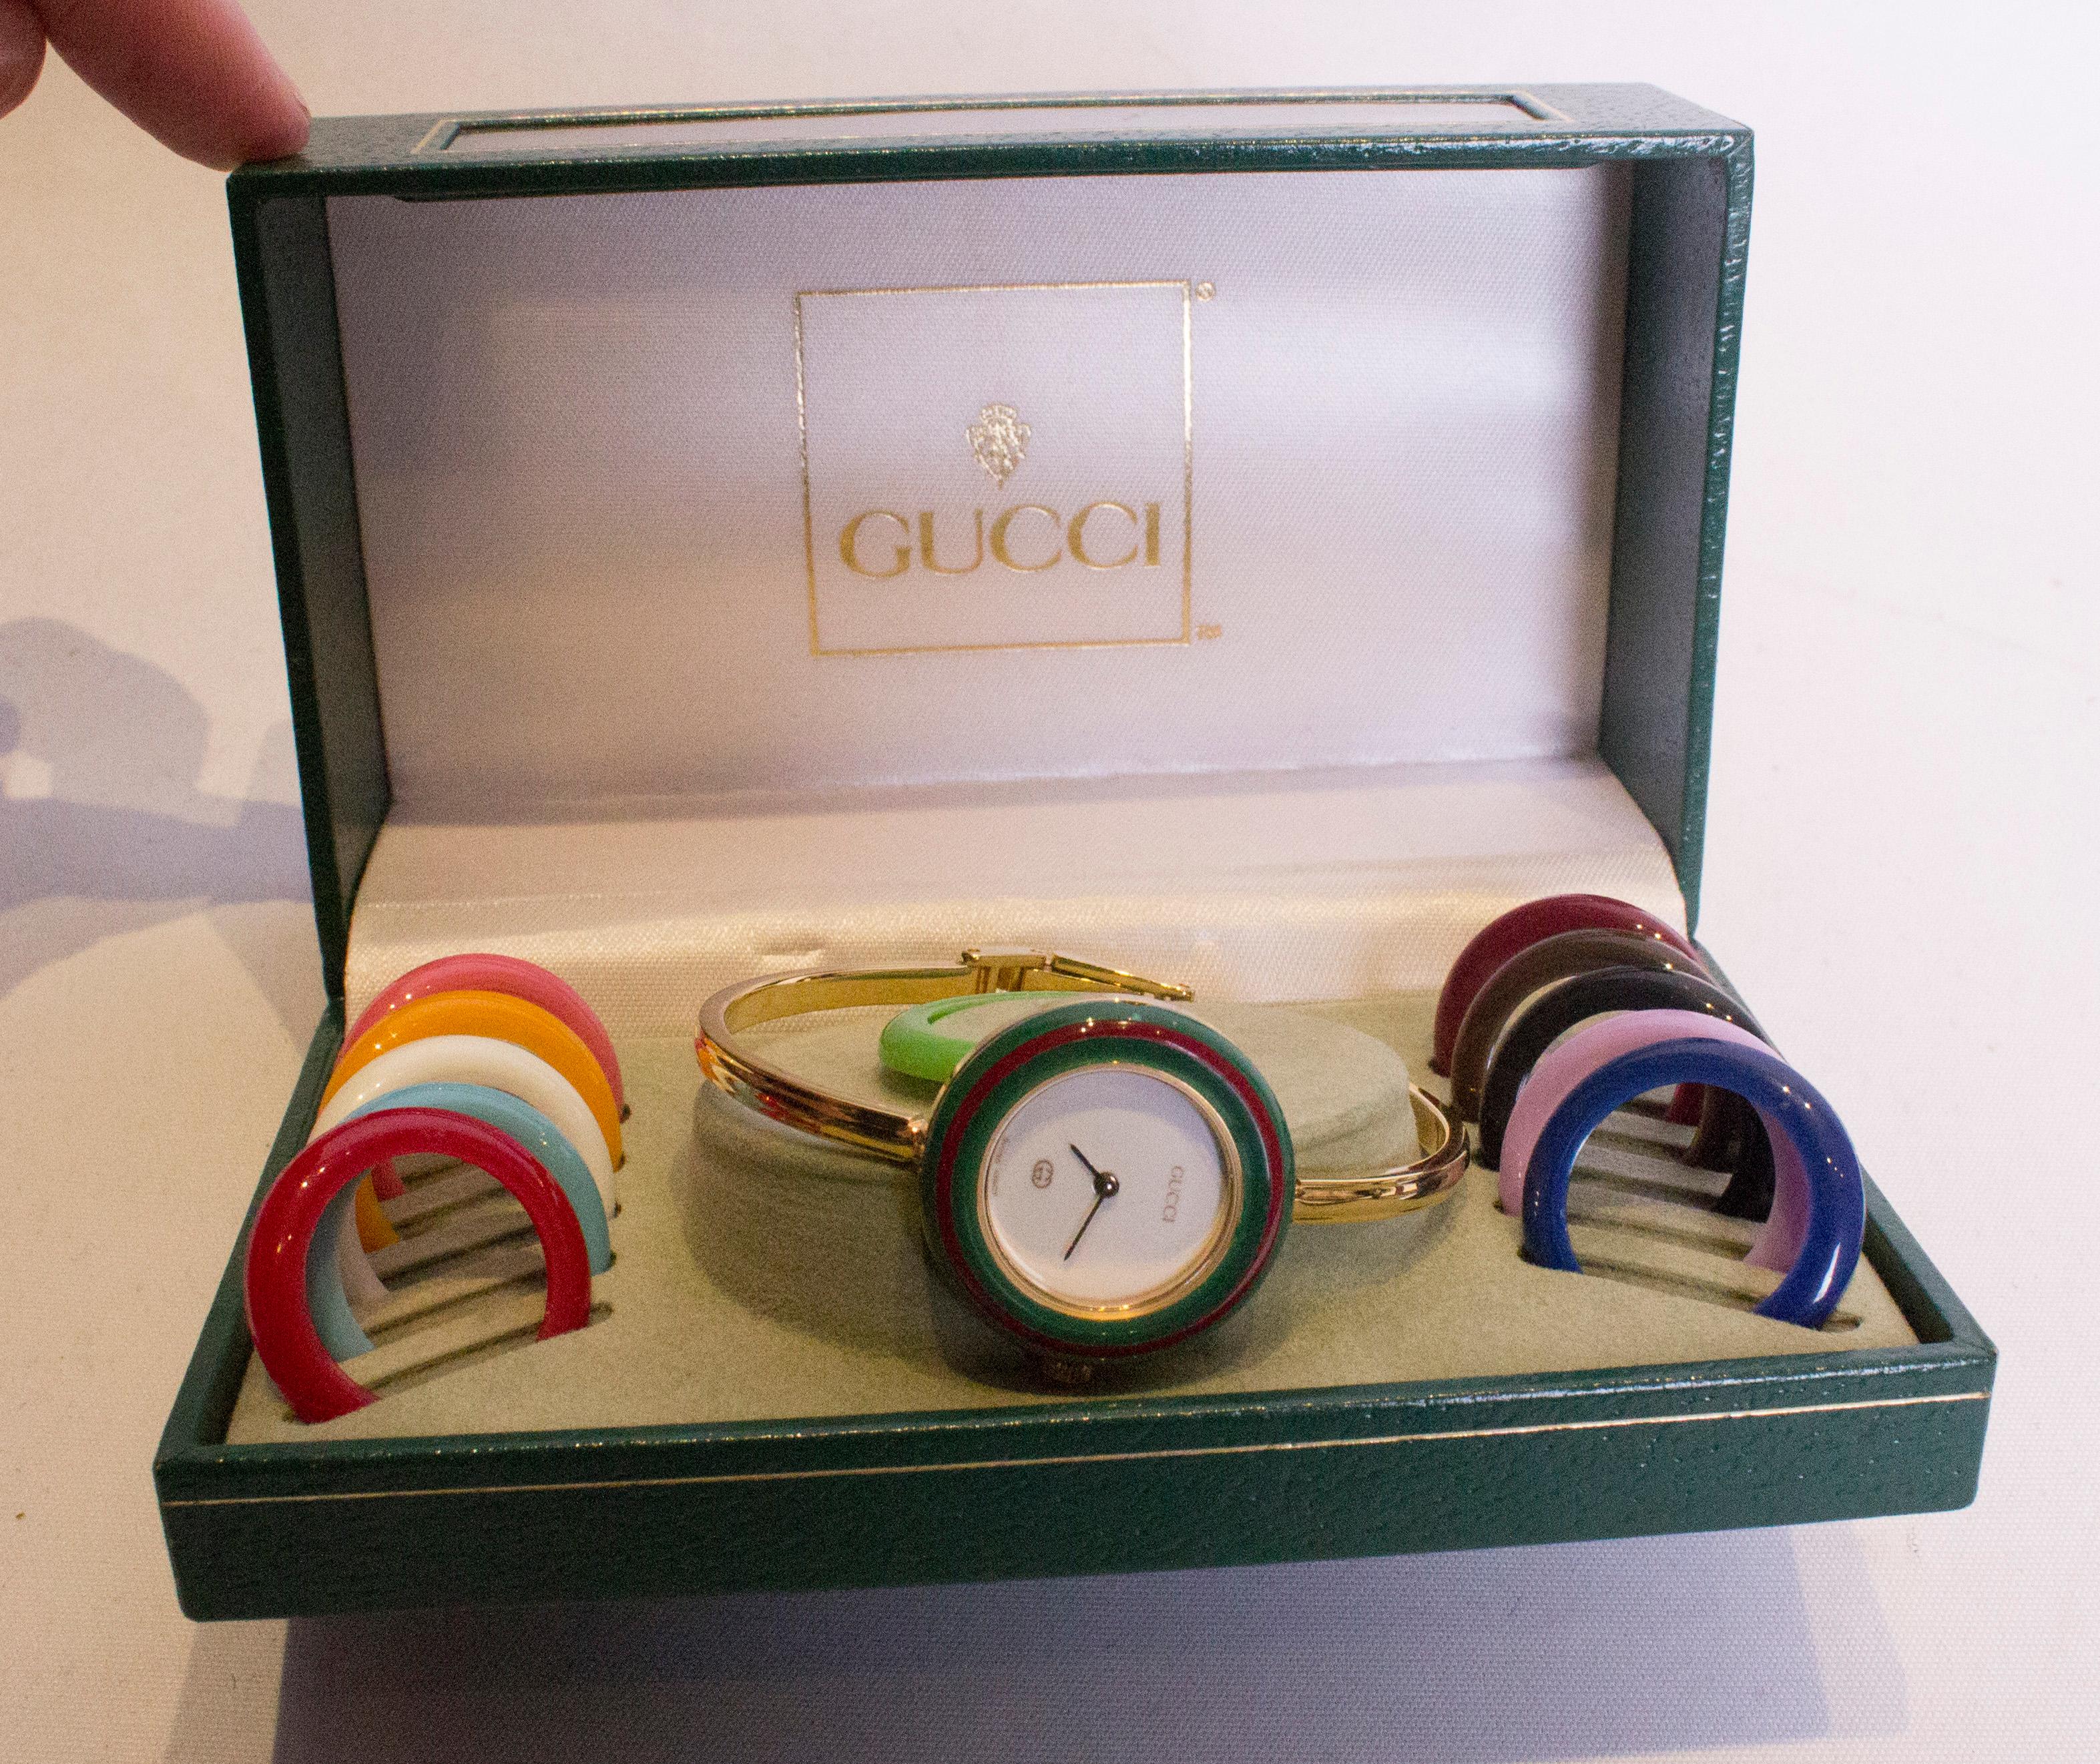 A great vintage watch by Gucci. This elegant and easy to wear watch has 12 colour options for the frame and so can match any outift. It is in excellent condition.